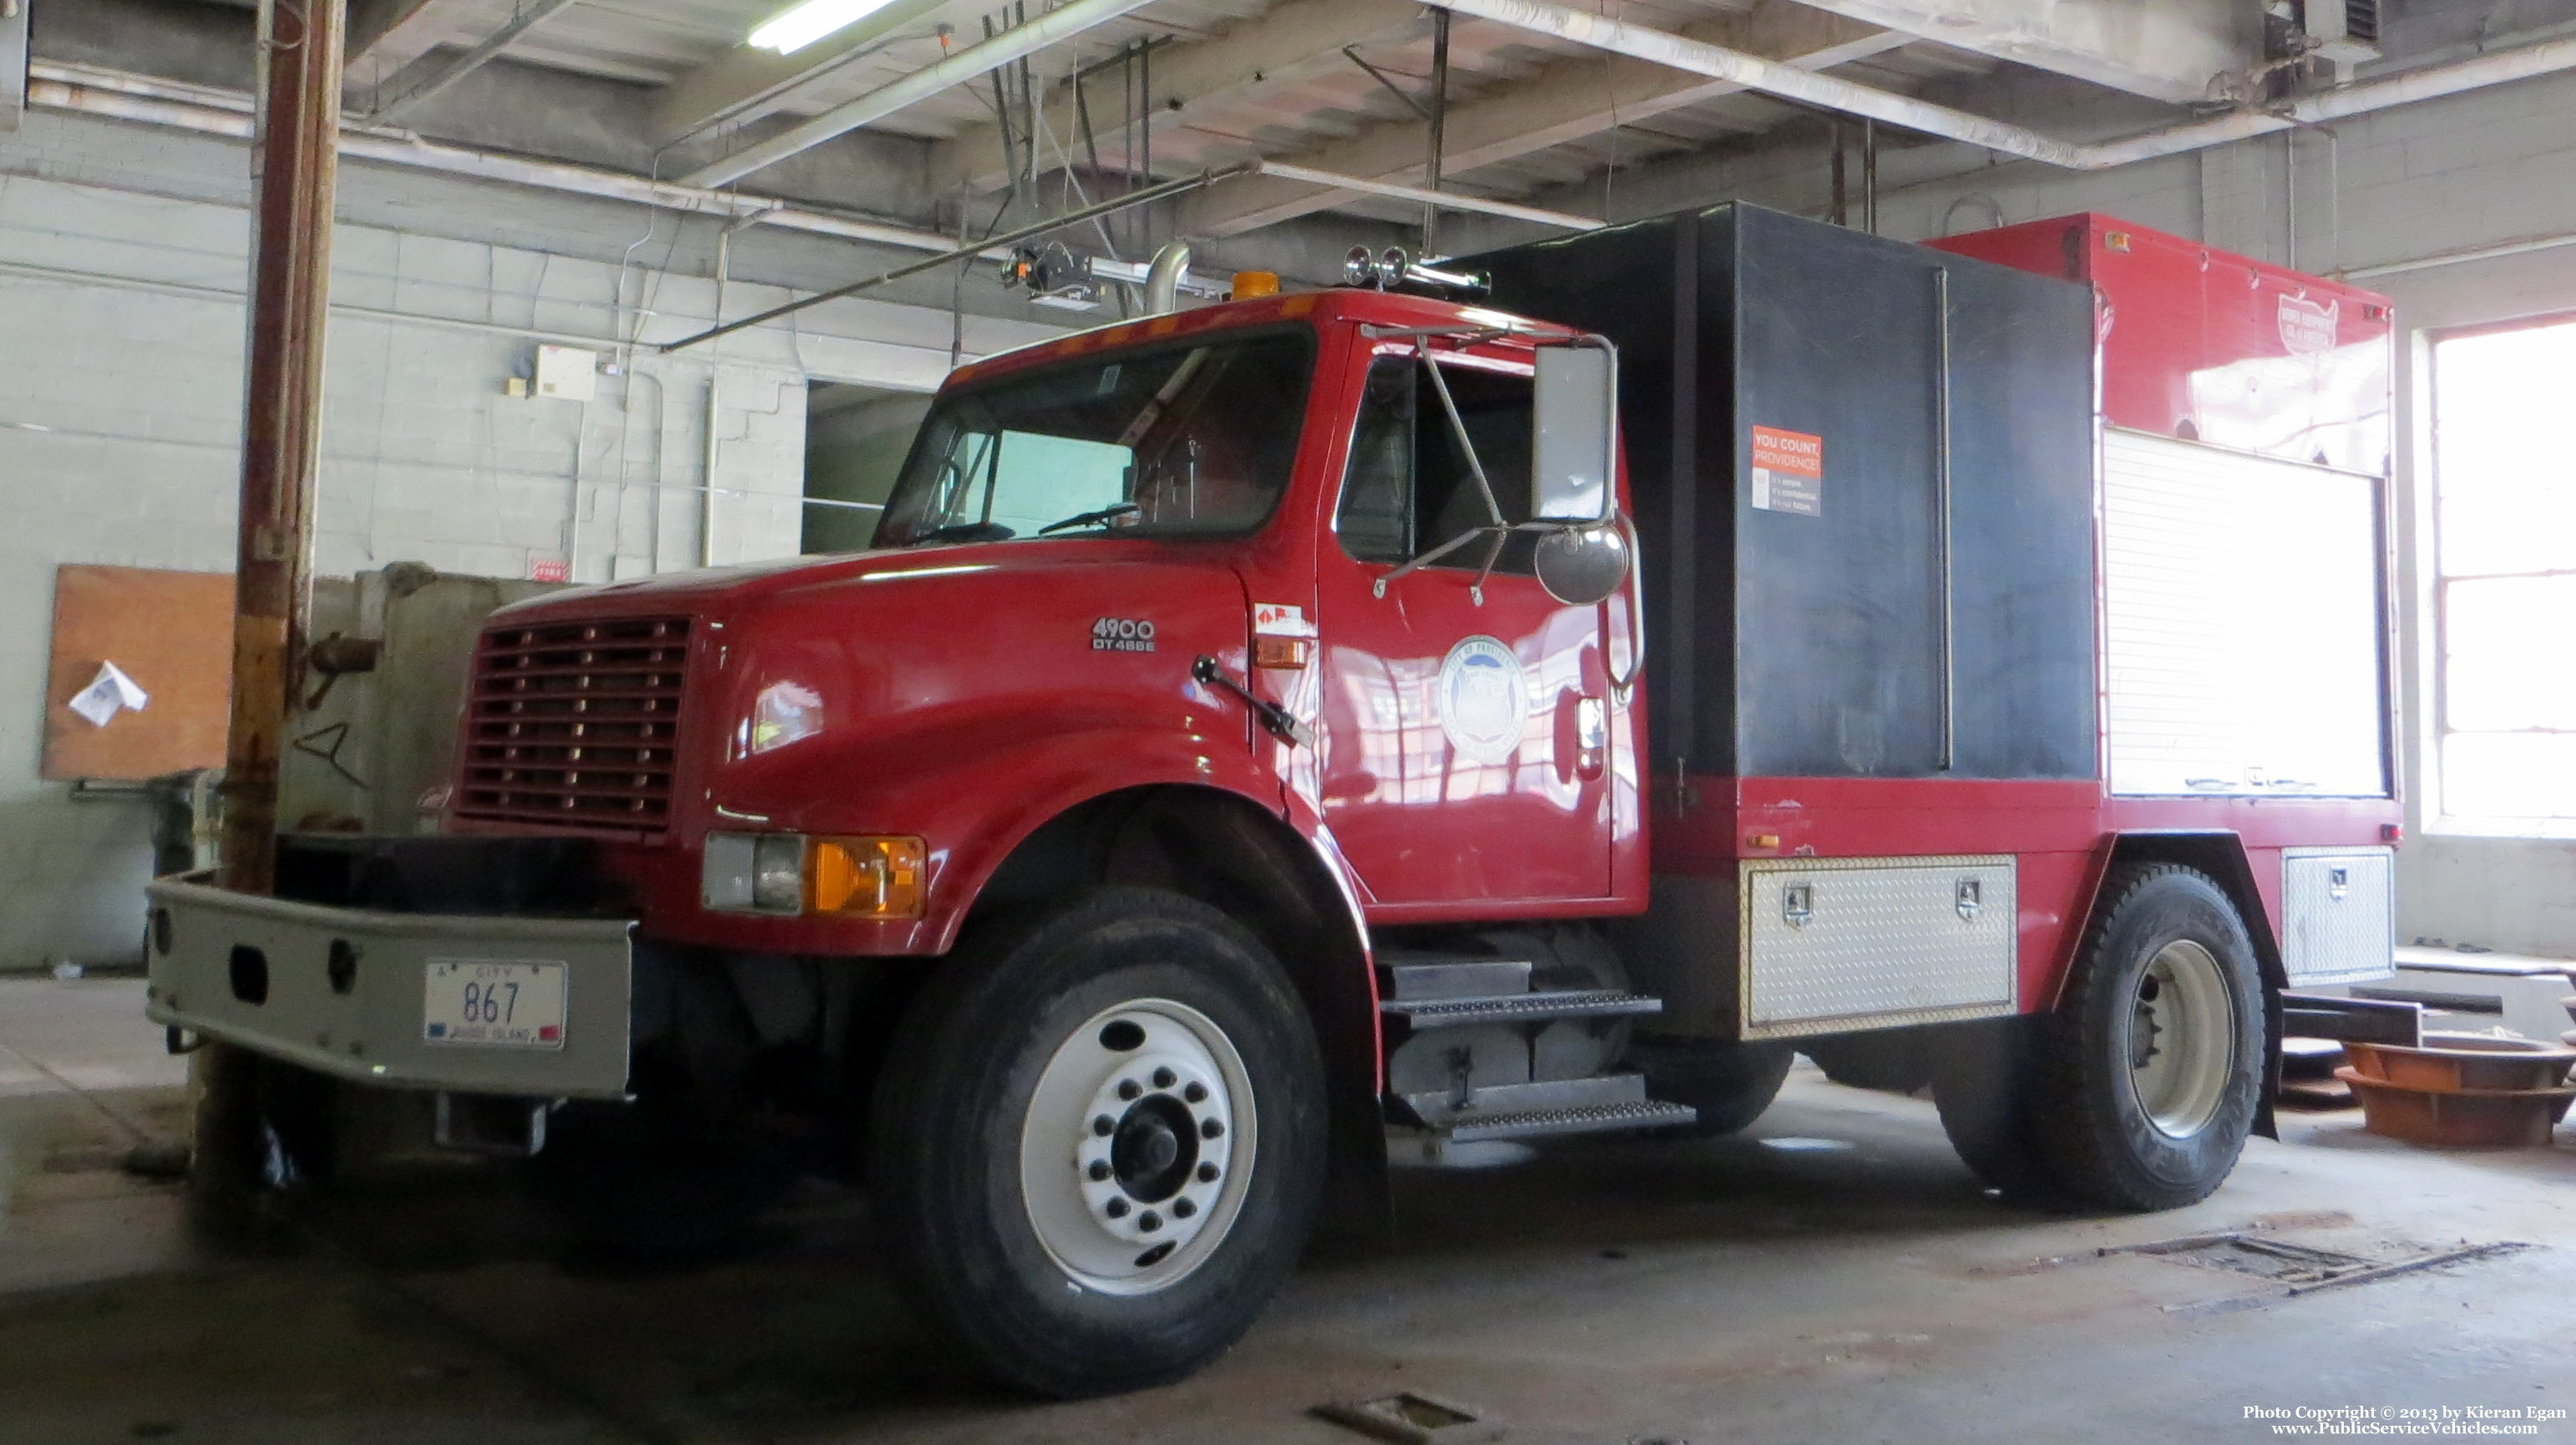 A photo  of Providence Sewer Division
            Truck 867, a 1989-2001 International 4900             taken by Kieran Egan